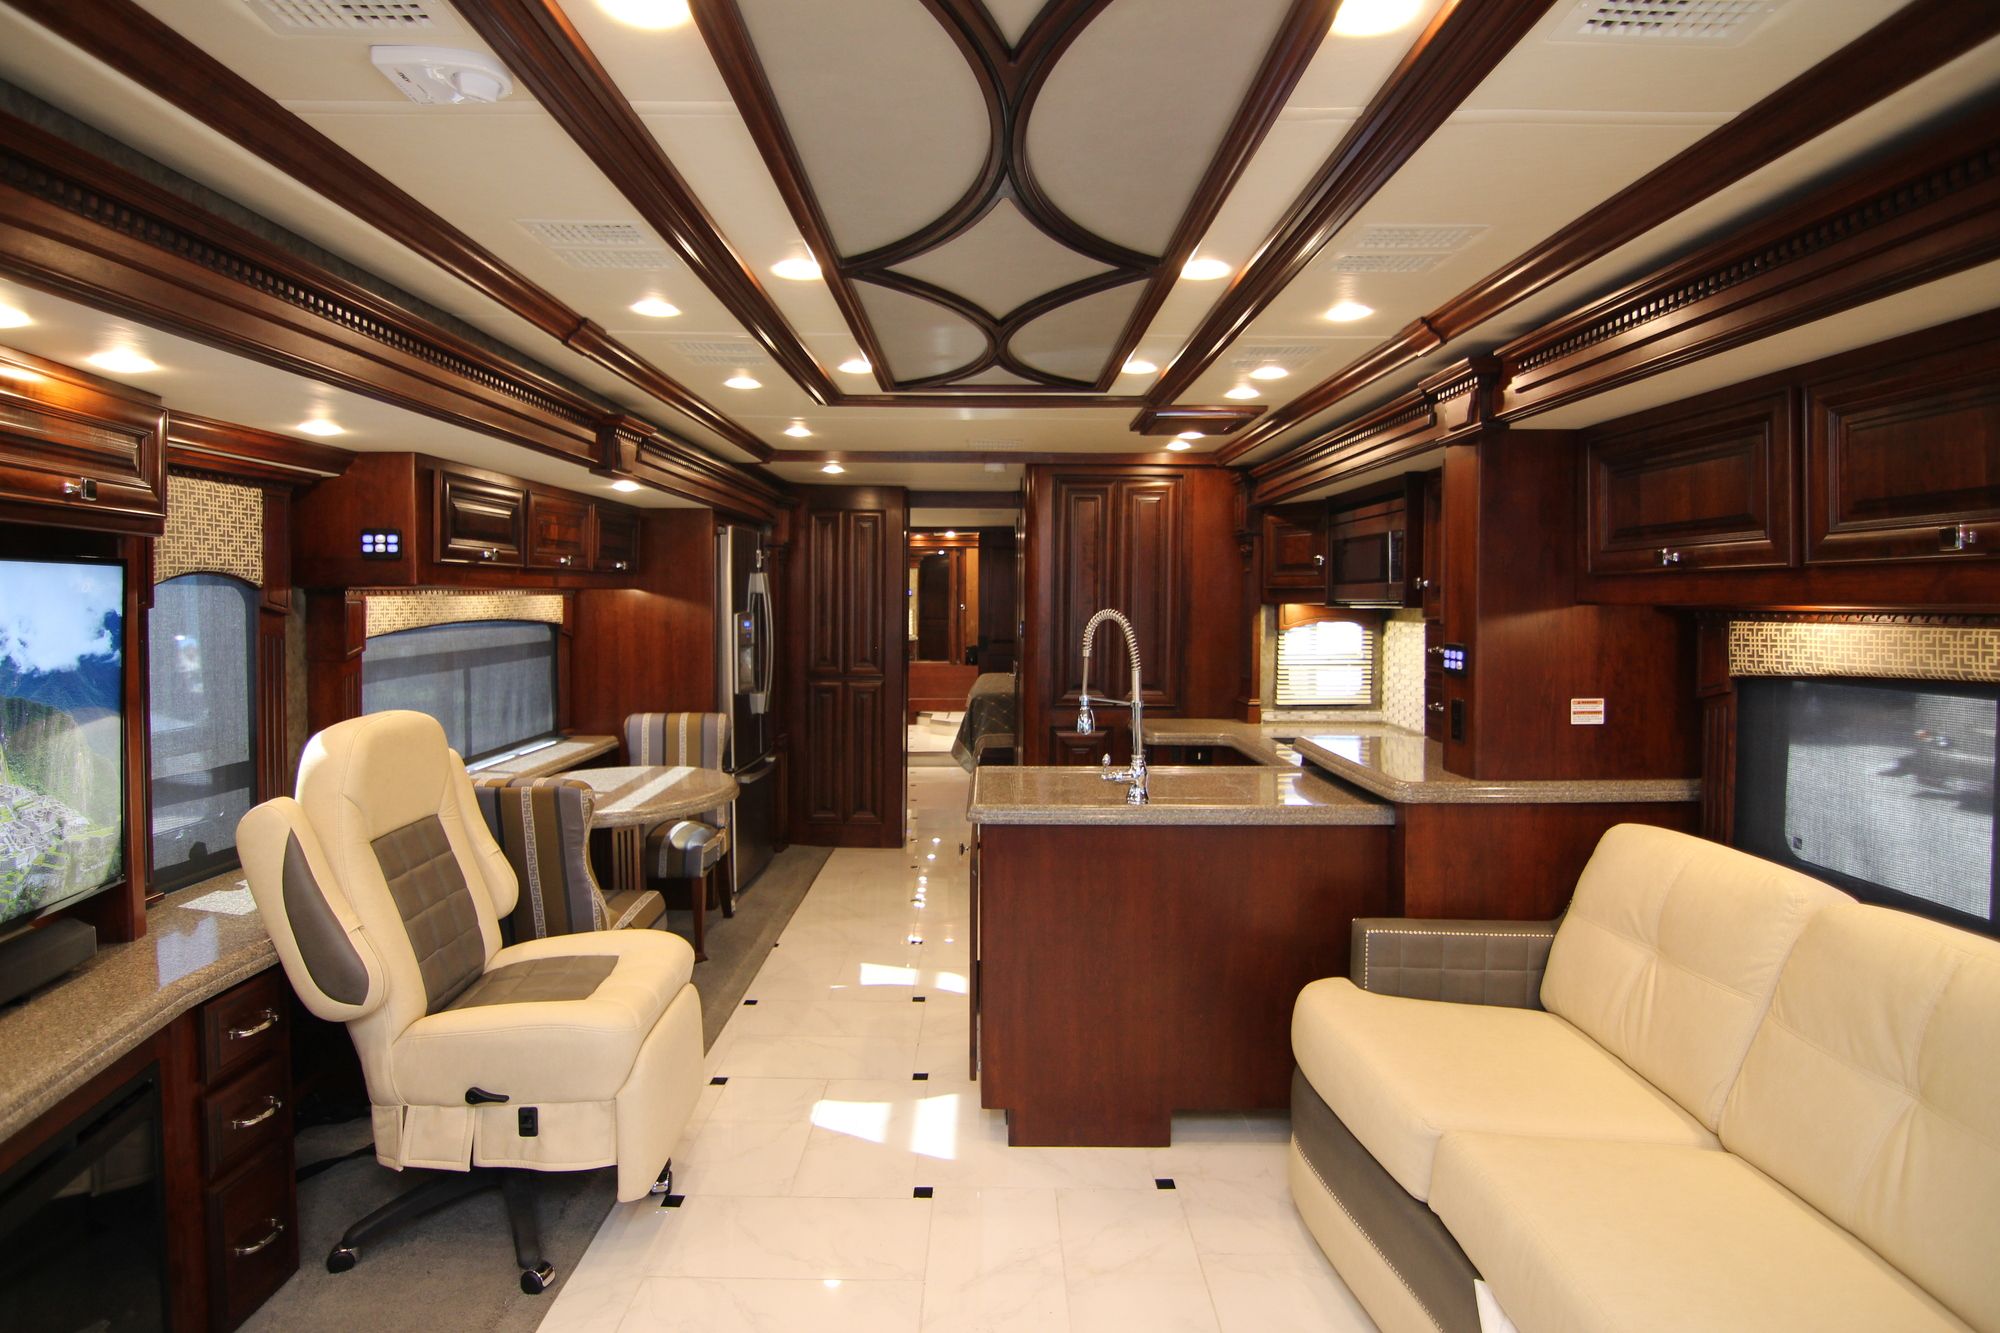 Used 2015 Monaco Dynasty 45P Class A  For Sale